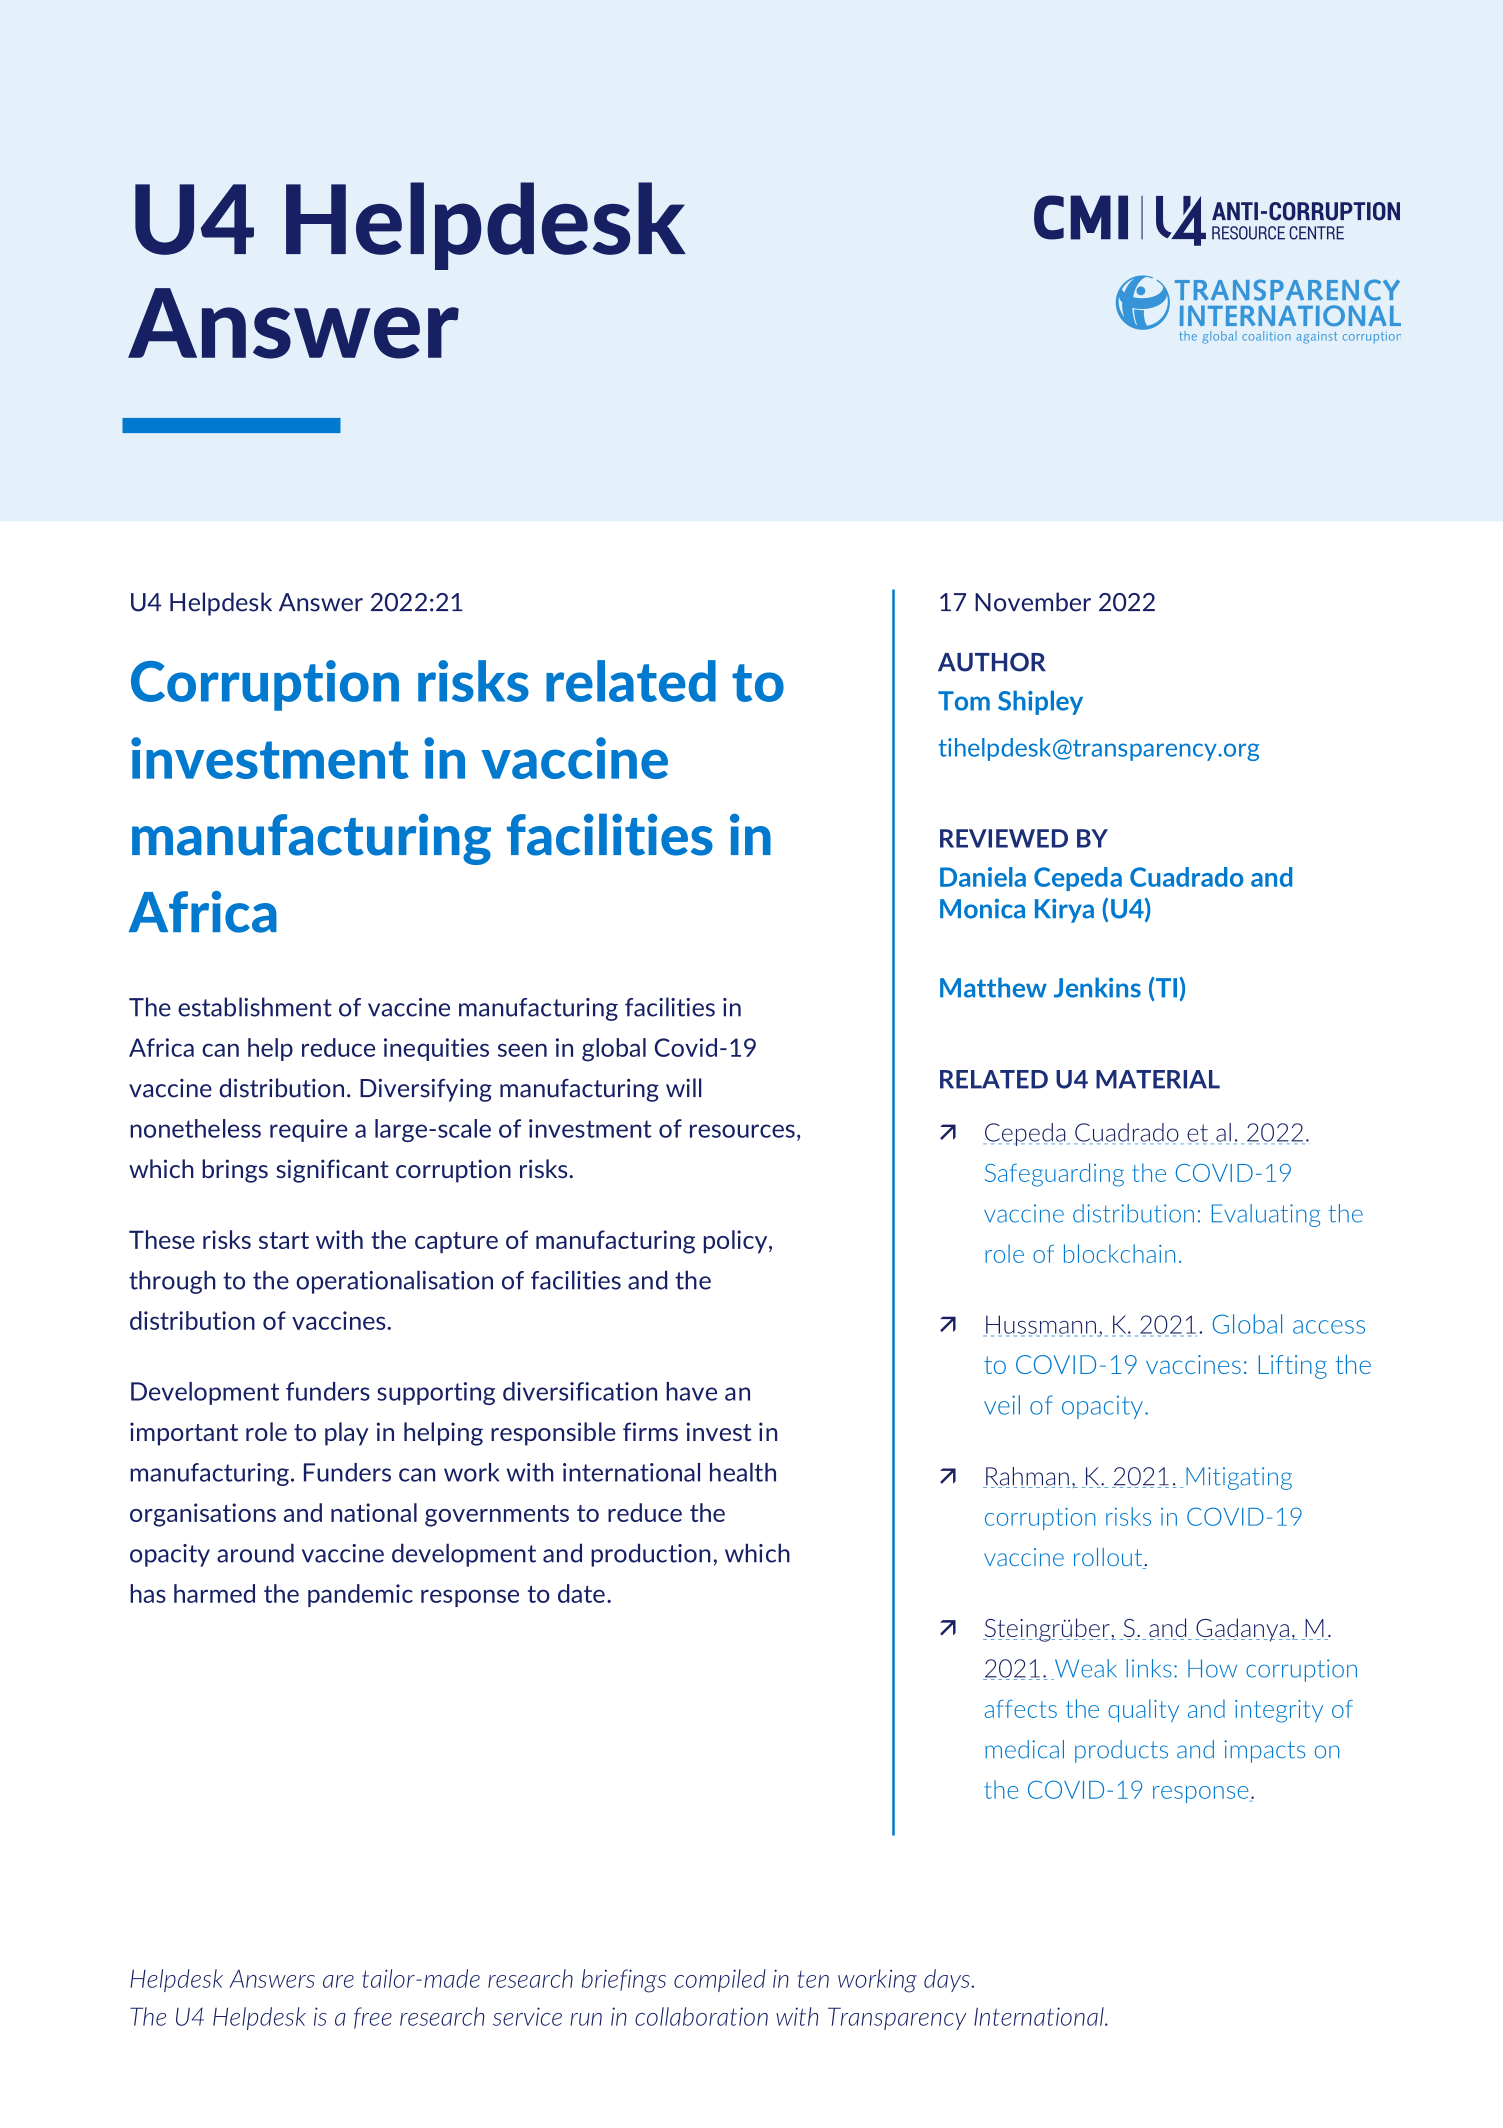 Corruption risks related to investment in vaccine manufacturing facilities in Africa